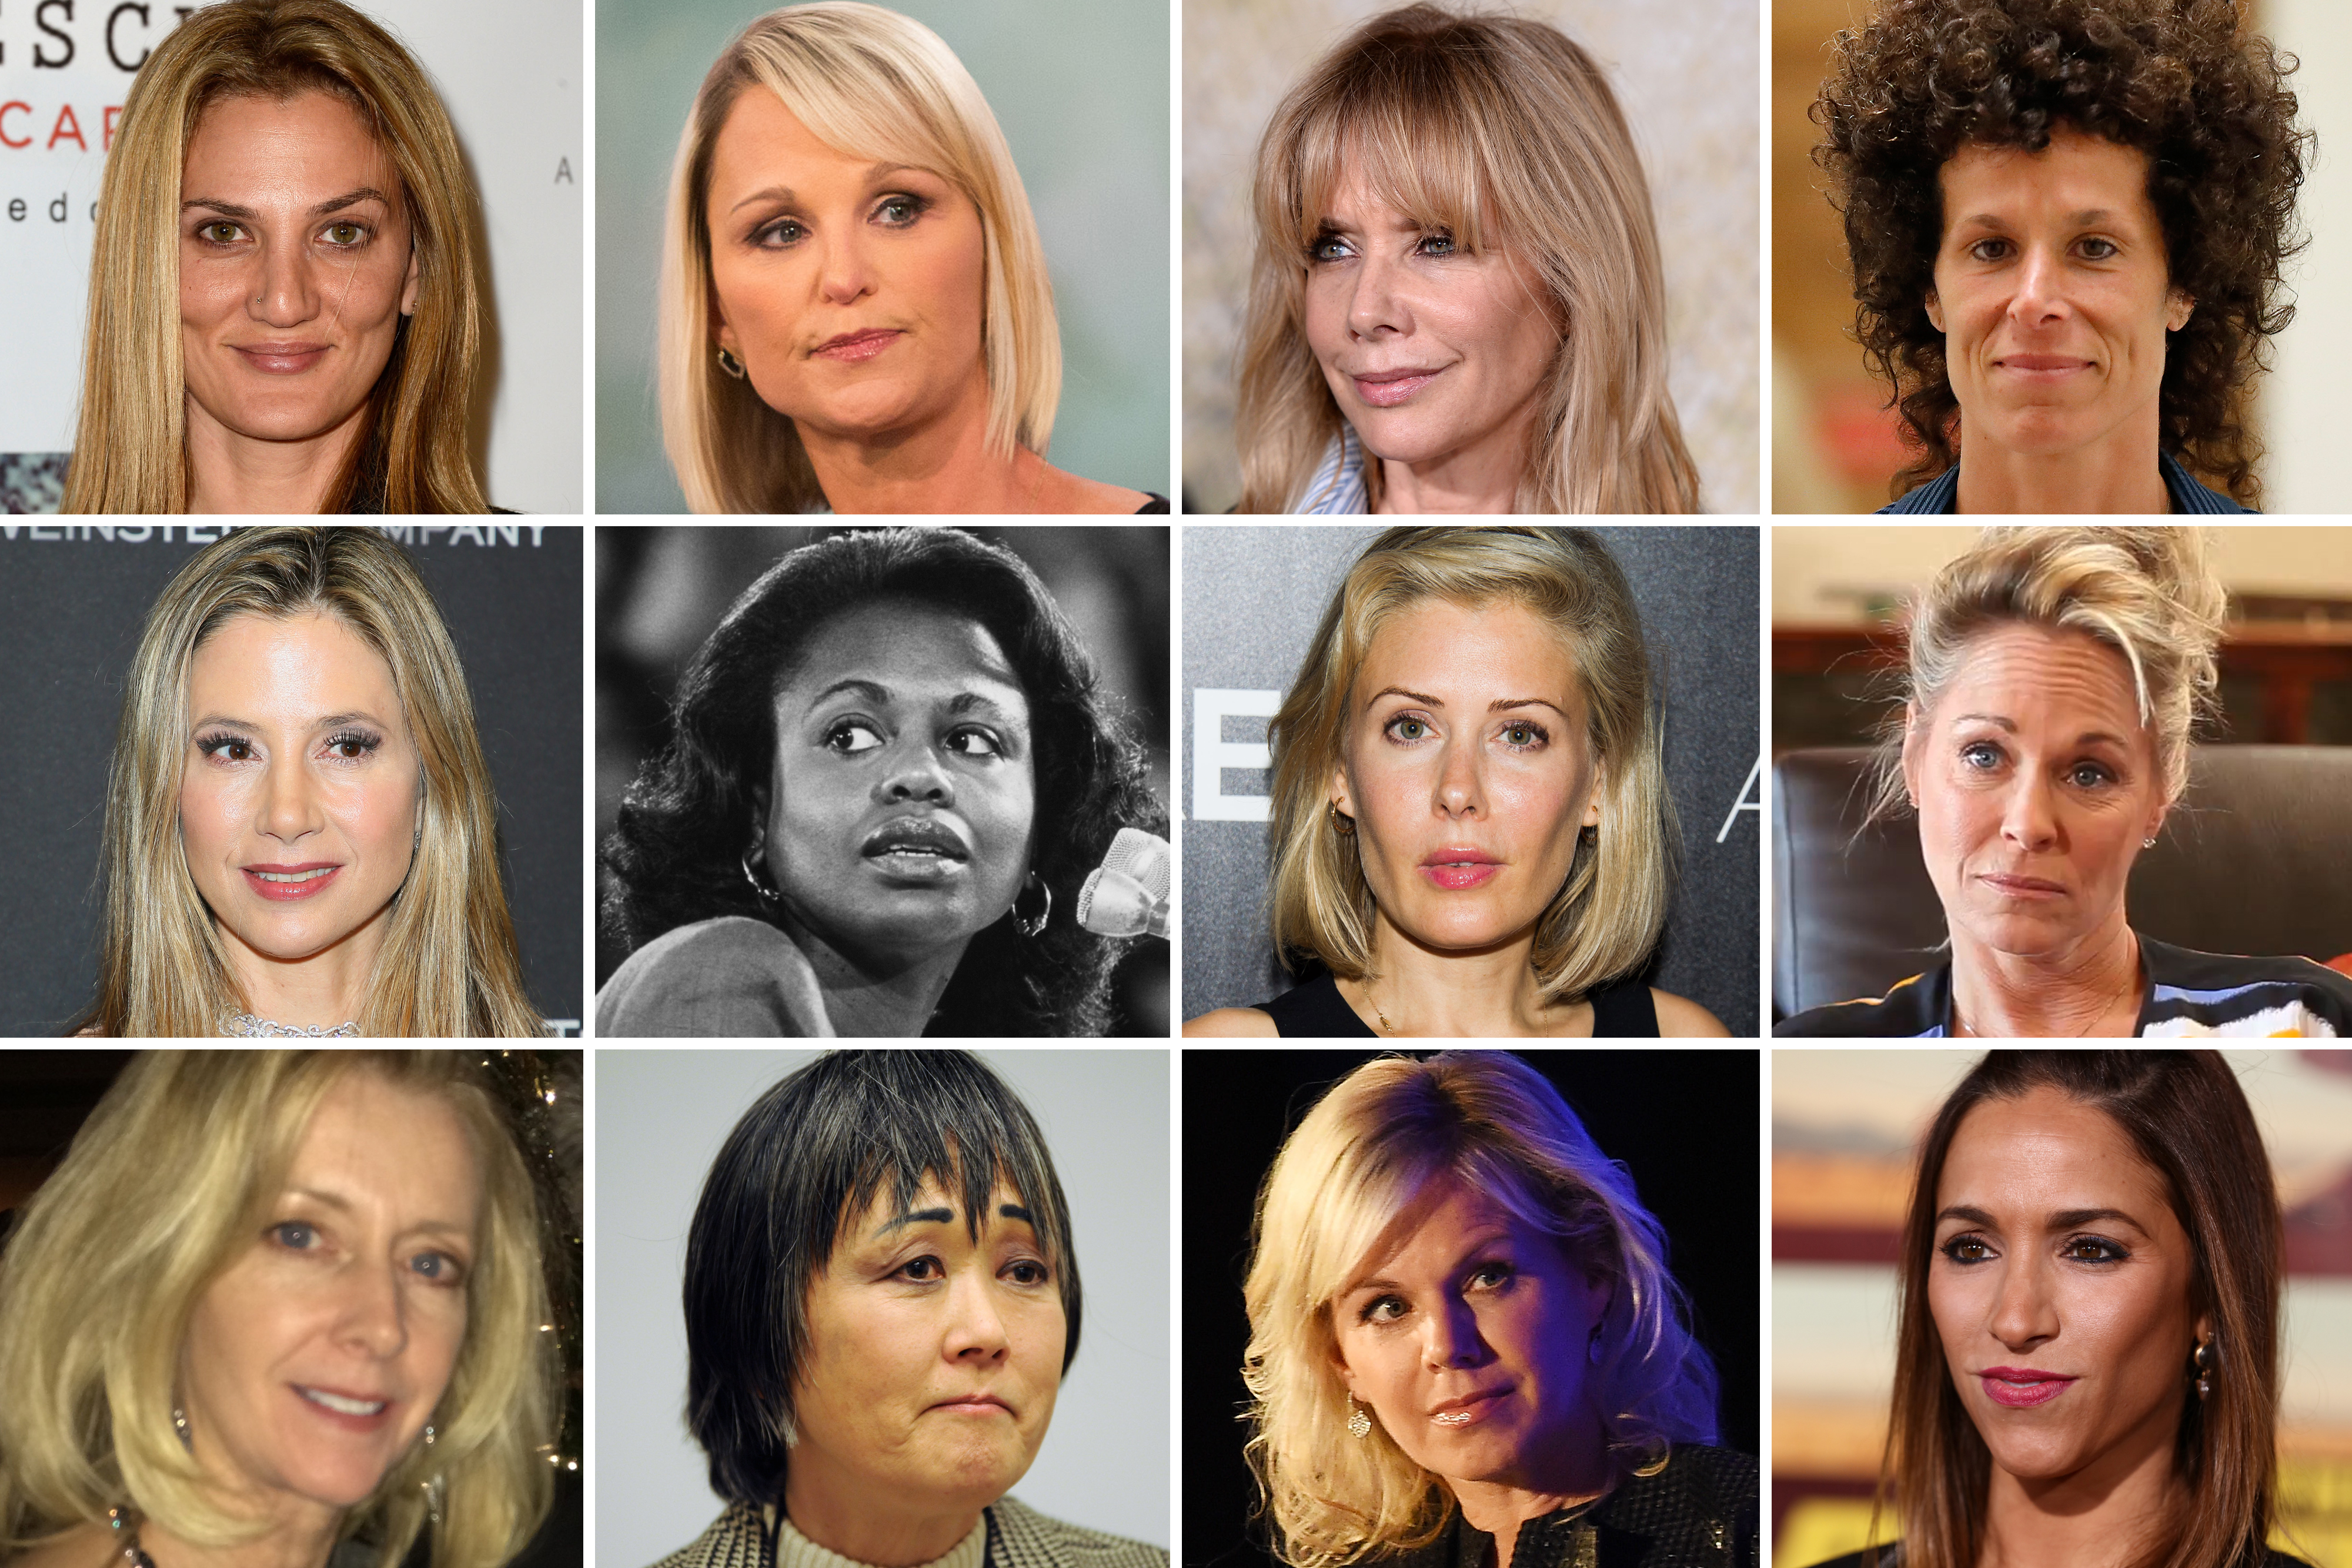 12 Women Who Say Sexual Harassment Cost Them Their Careers Money picture